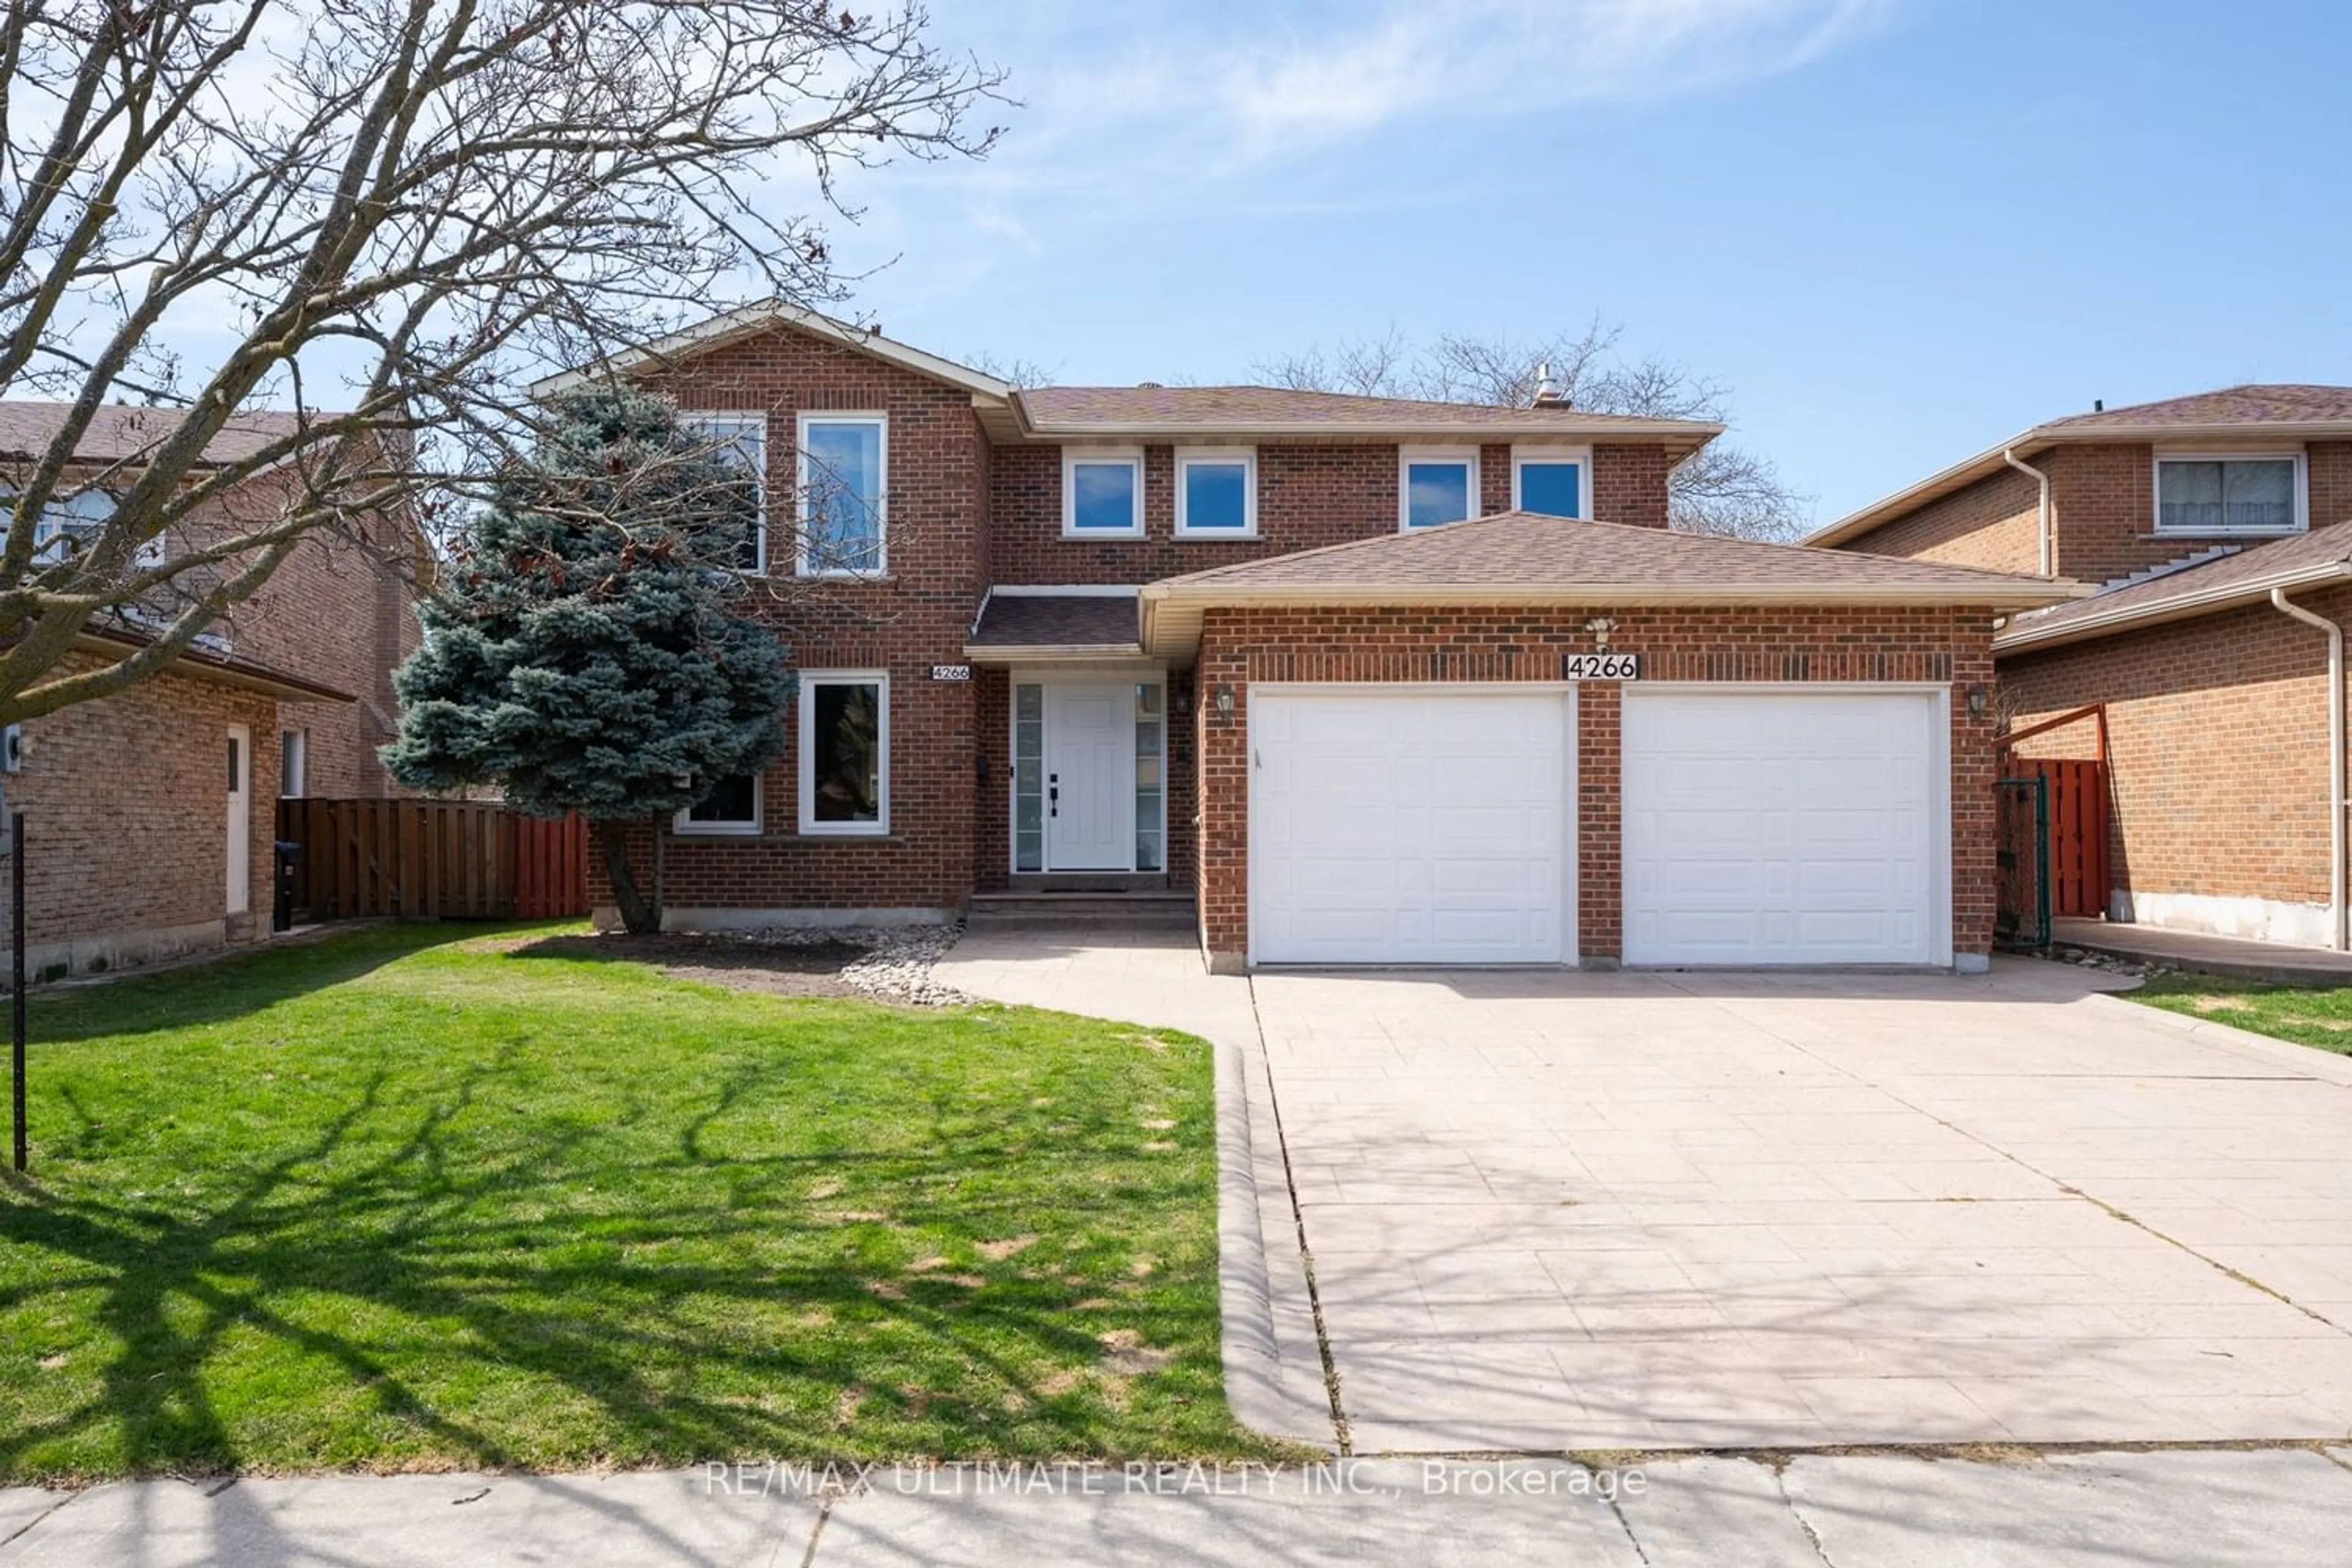 Home with brick exterior material for 4266 Golden Orchard Dr, Mississauga Ontario L4W 3G3